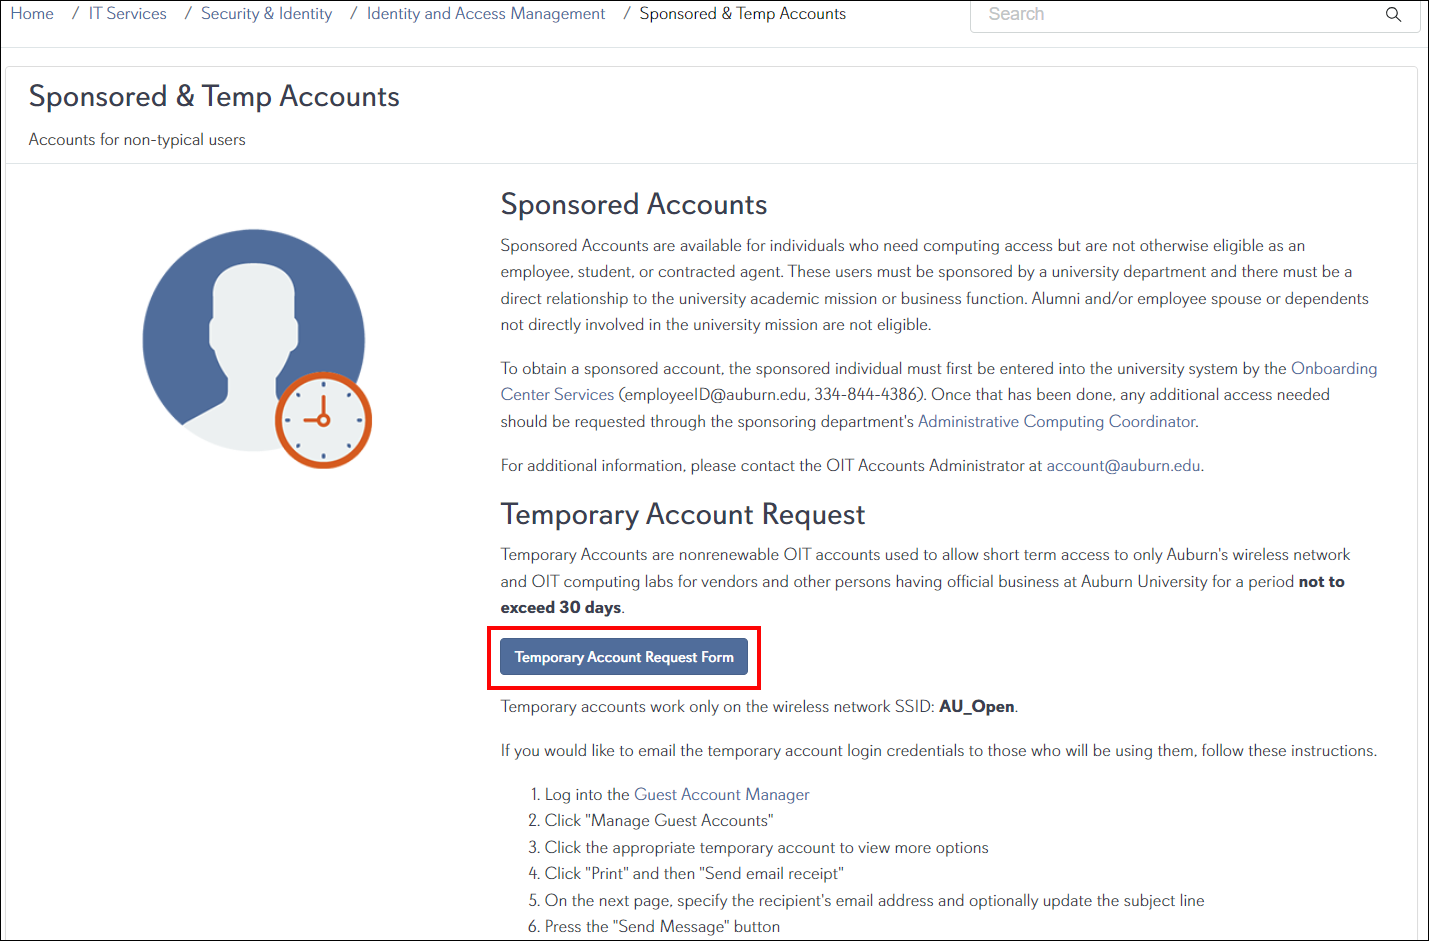 Temporary Account Request Form button